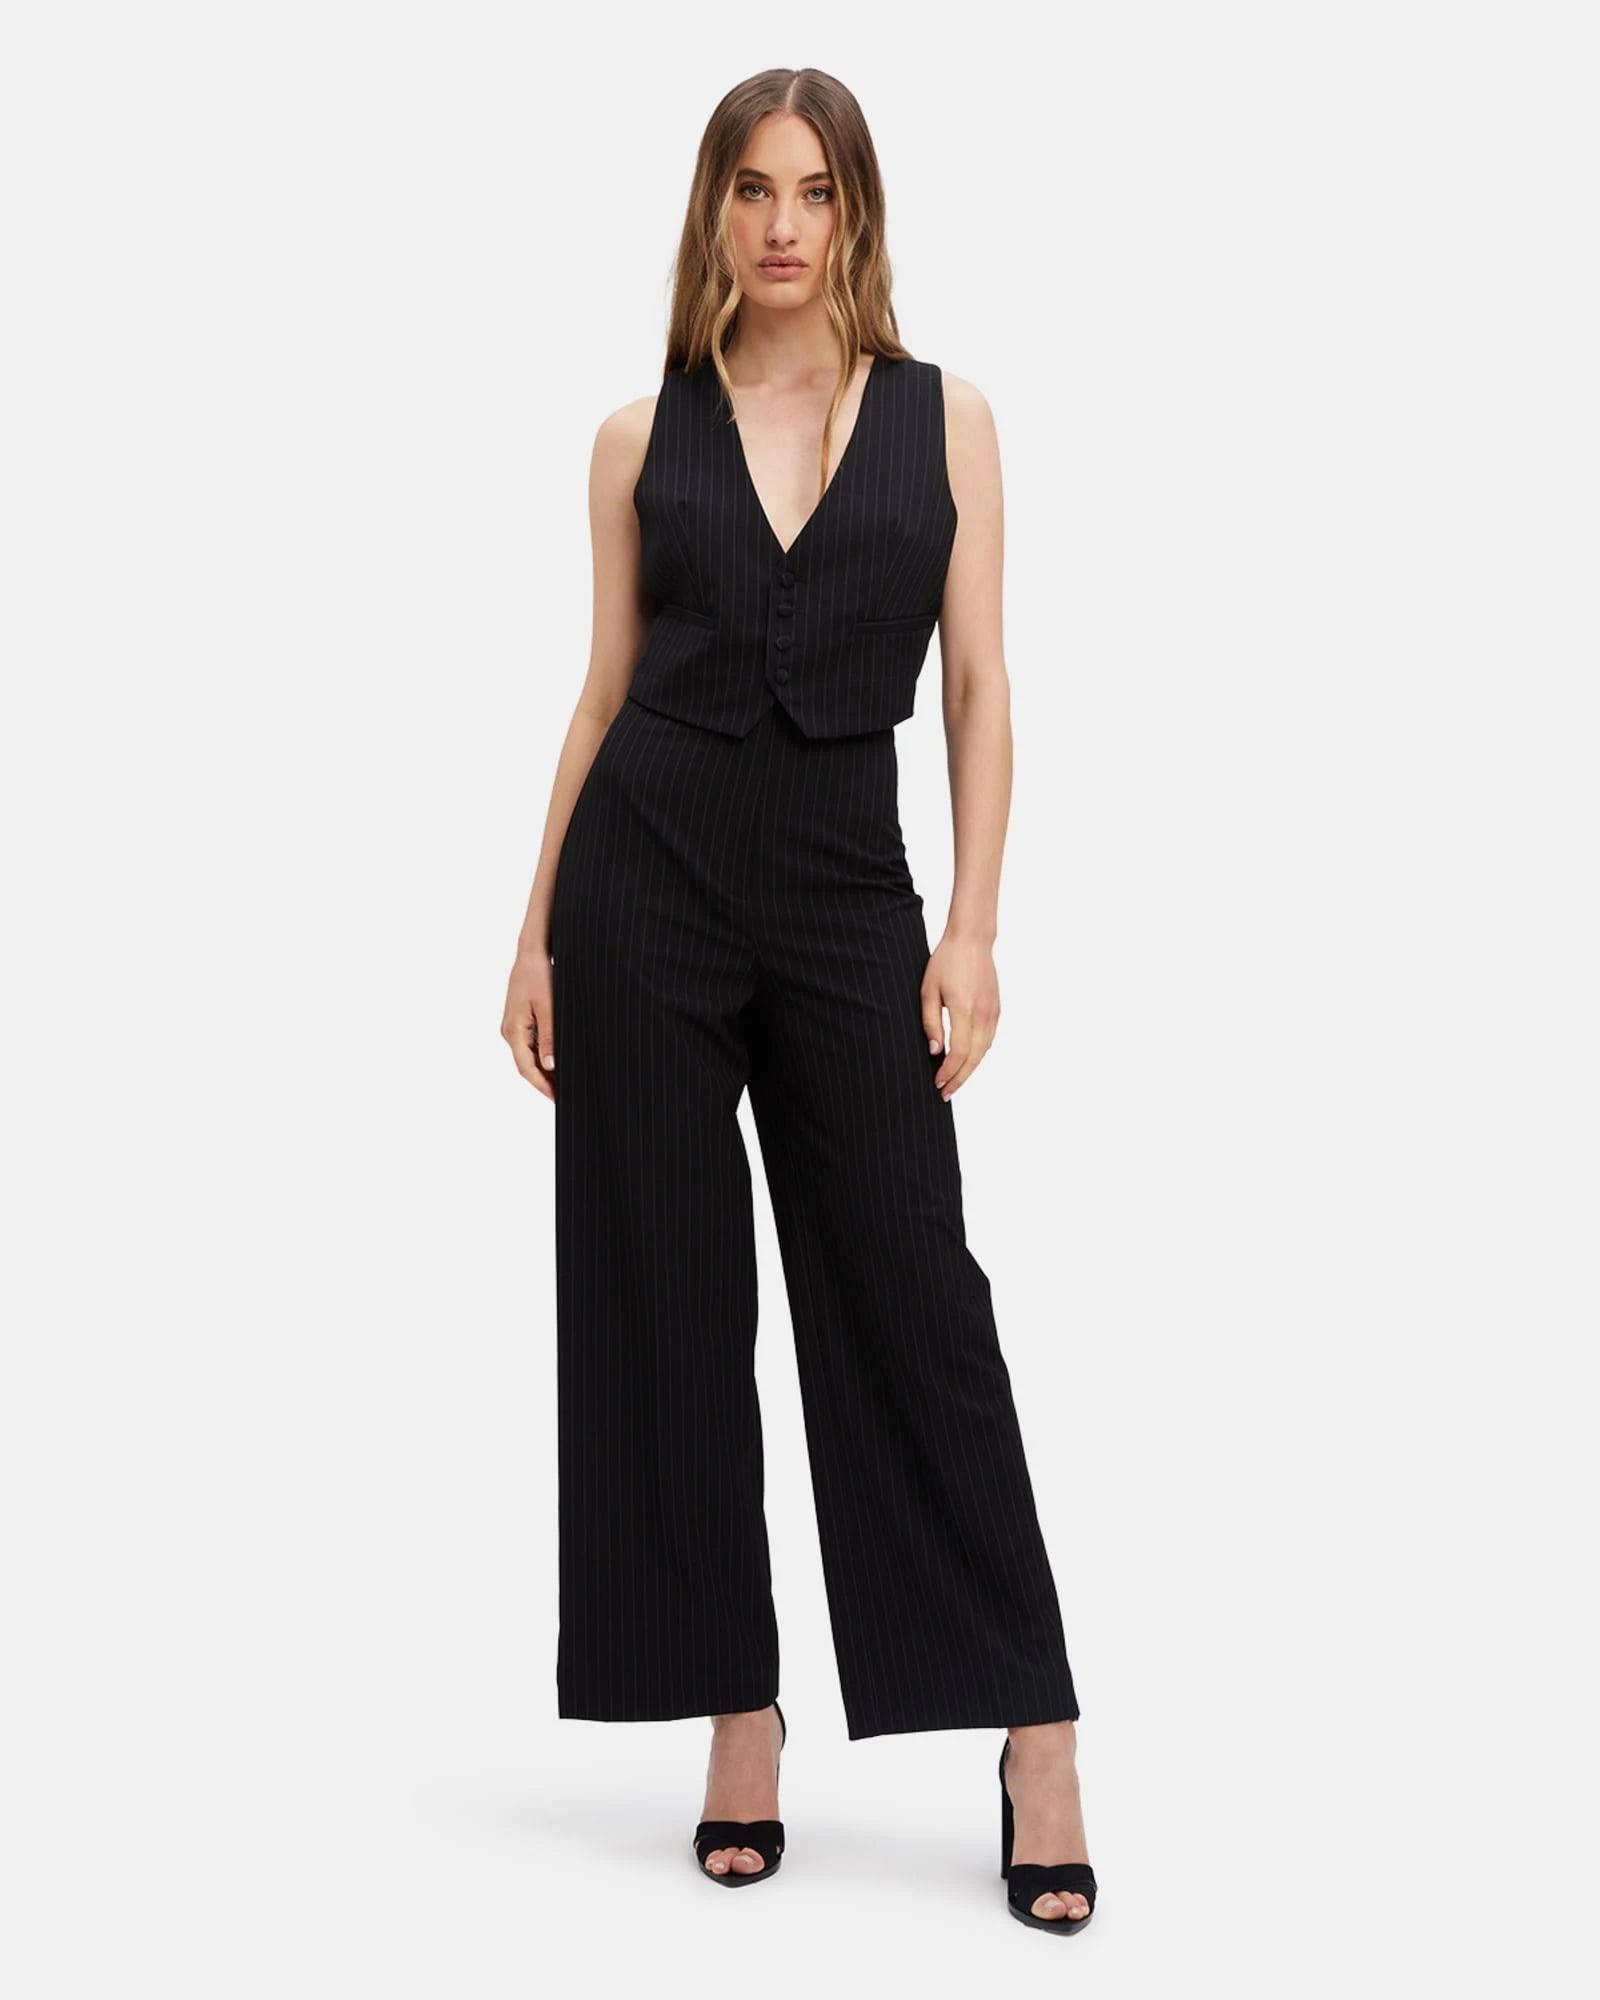 Wide Leg Pinstripe Pants in Black/White: Power Suiting with a Contemporary Touch | Image